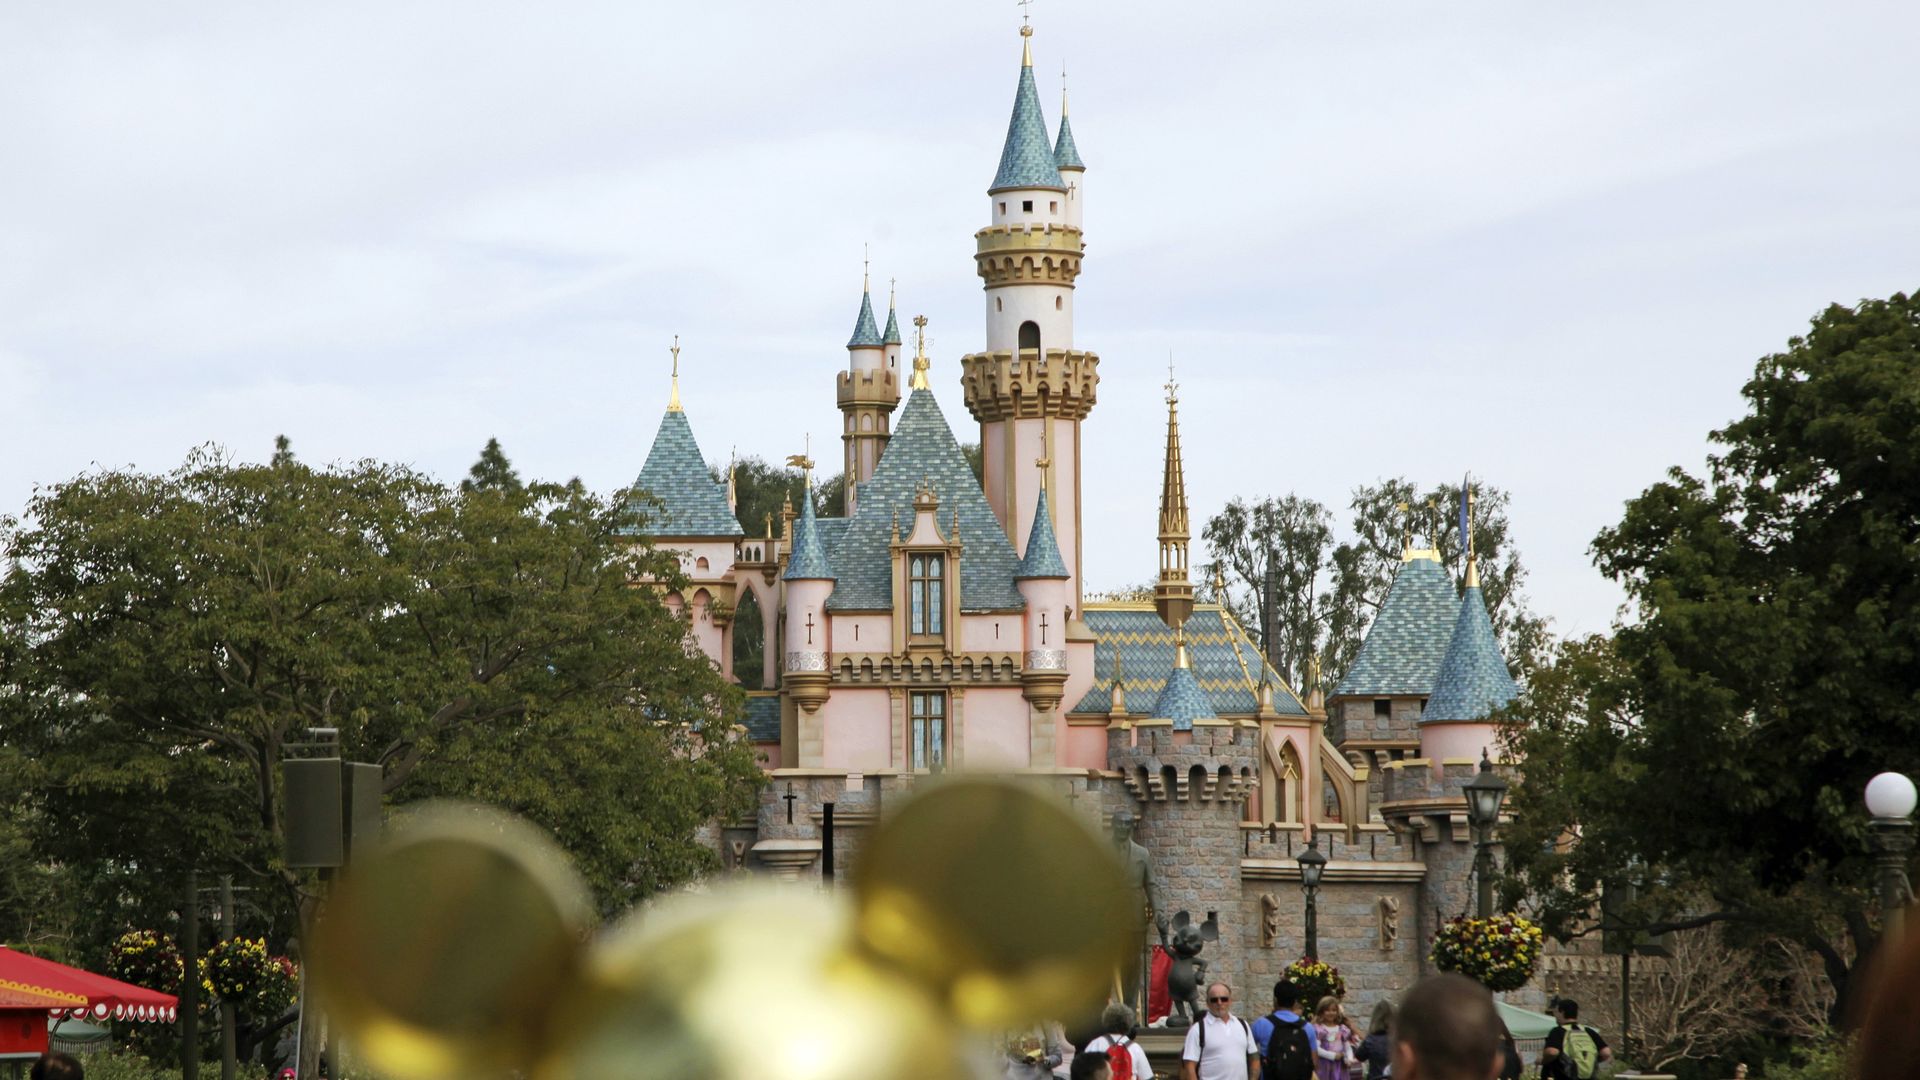 Disneyland castles with a person wearing Mickey ears in the foreground.